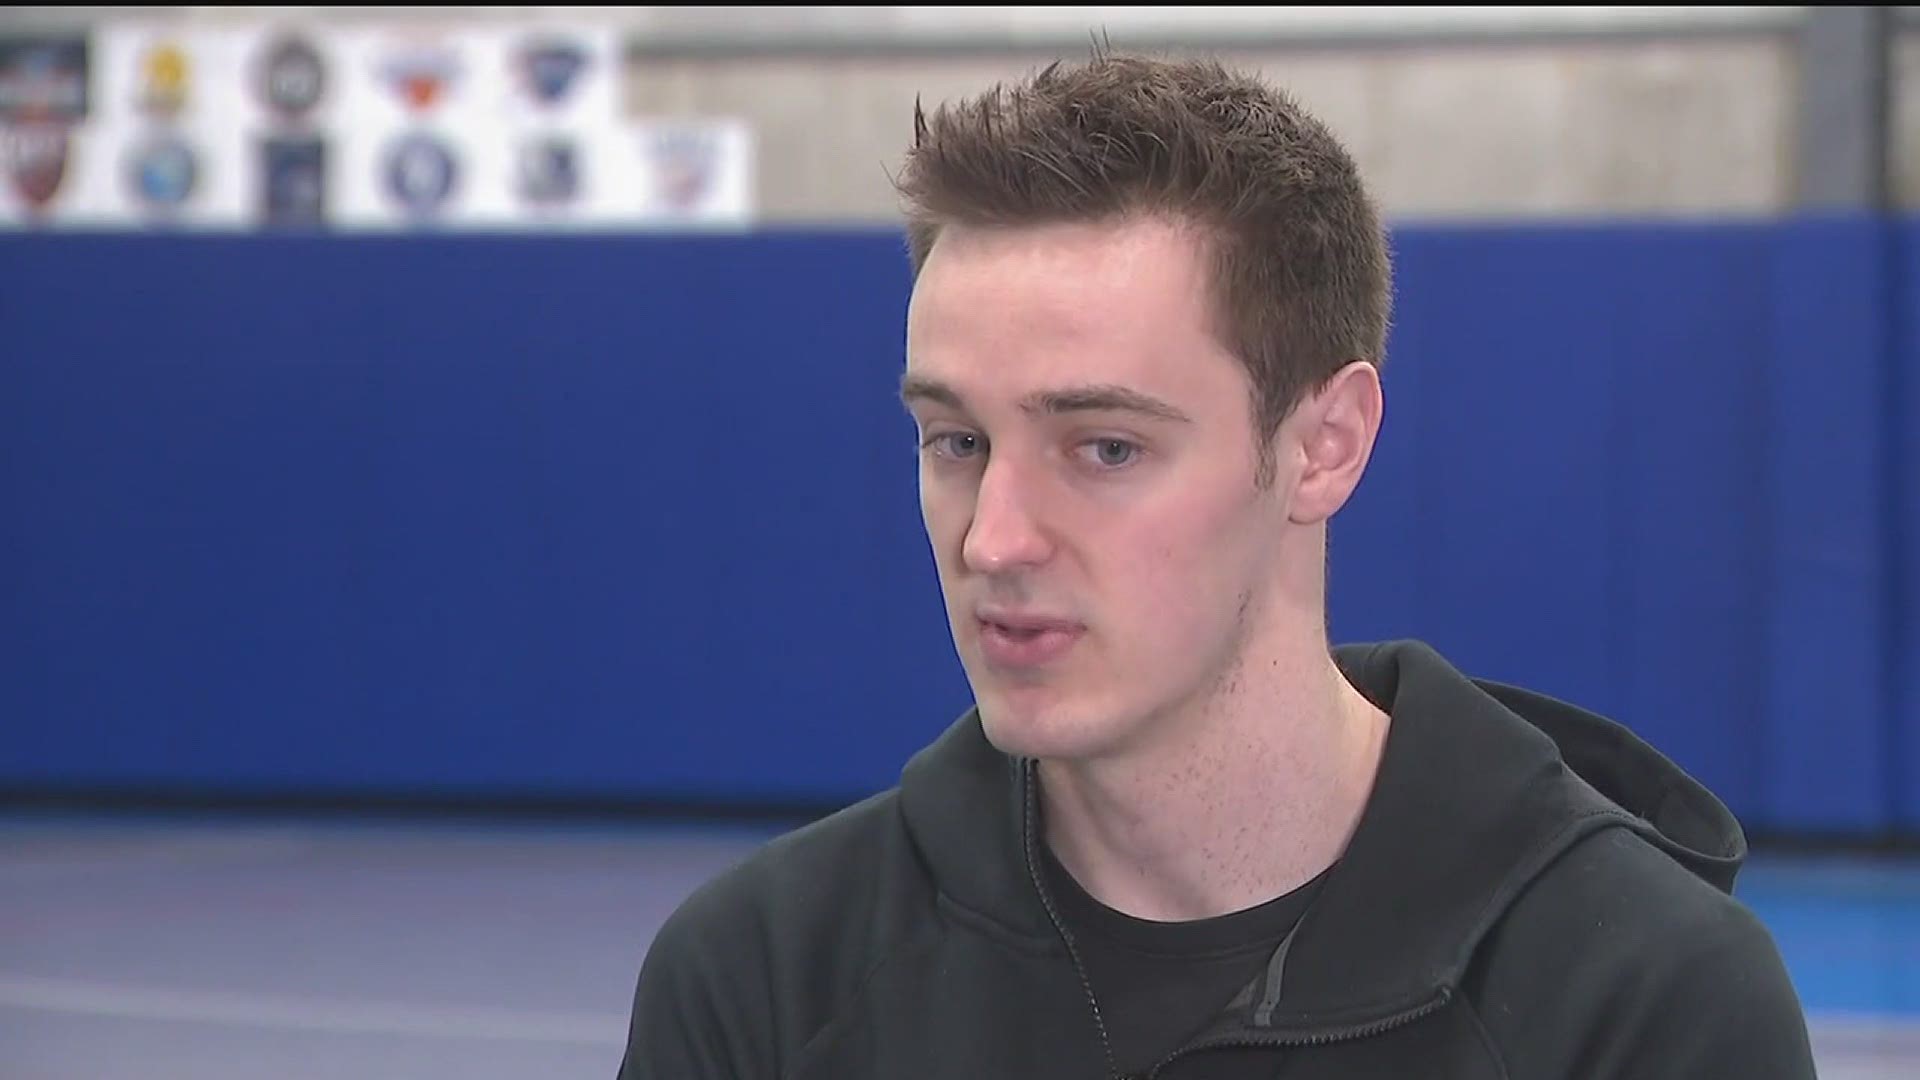 Former Bettendorf and Iowa Hawkeye basketball player Nicholas Baer gives insight into his first professional season being cut short due to coronavirus.